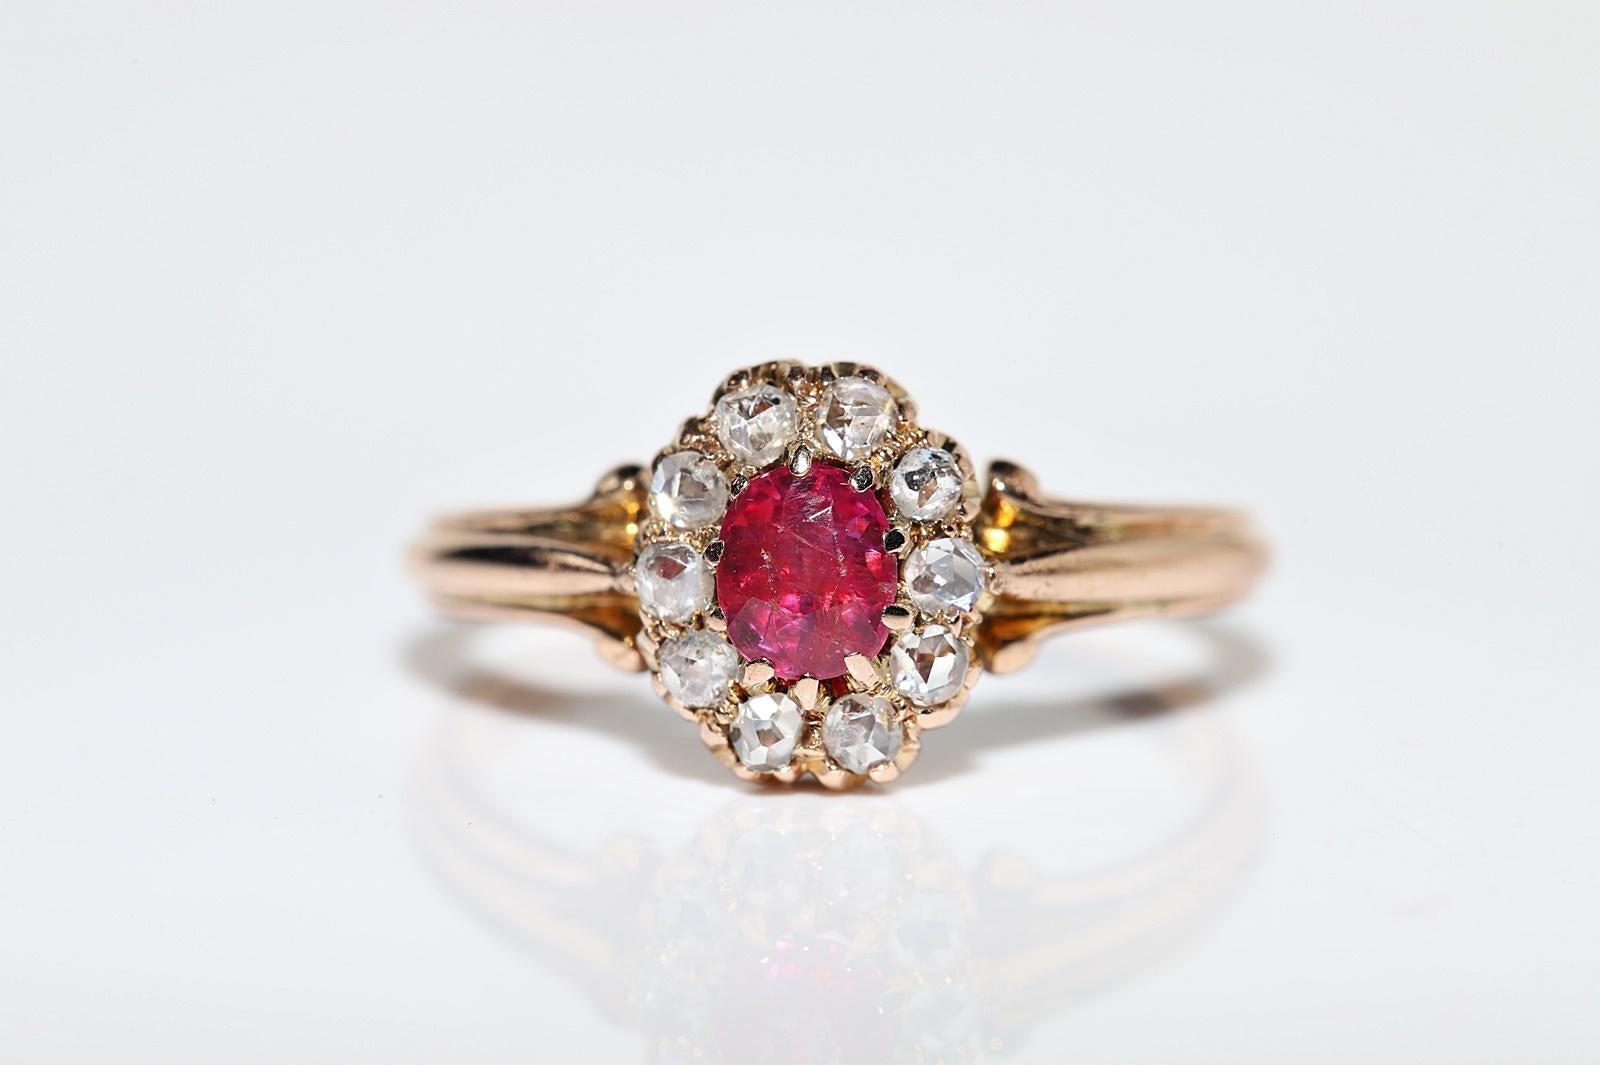 Antique Circa 1900s 14k Gold Natural Rose Cut Diamond And Ruby Decorated Ring In Good Condition For Sale In Fatih/İstanbul, 34